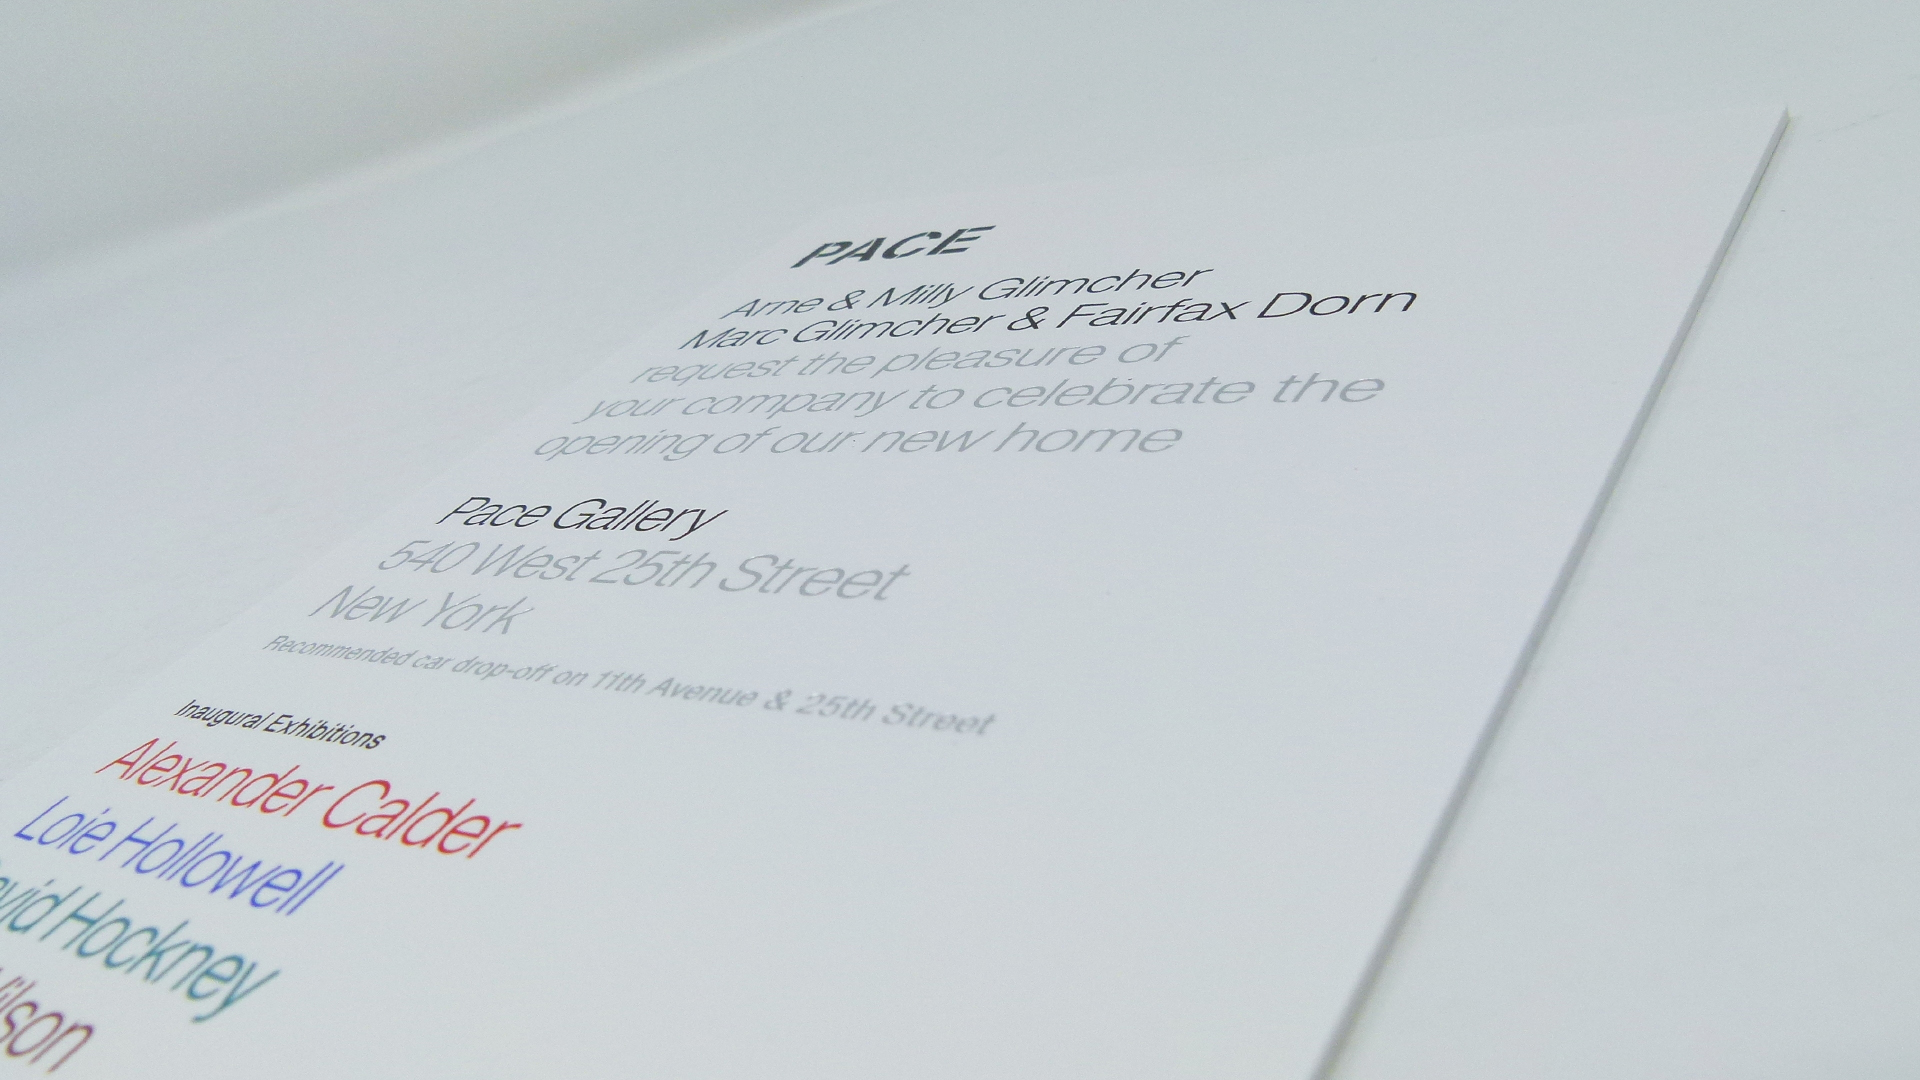 Animated Pace Gallery Invitation by DataGraphic - PaperSpecs